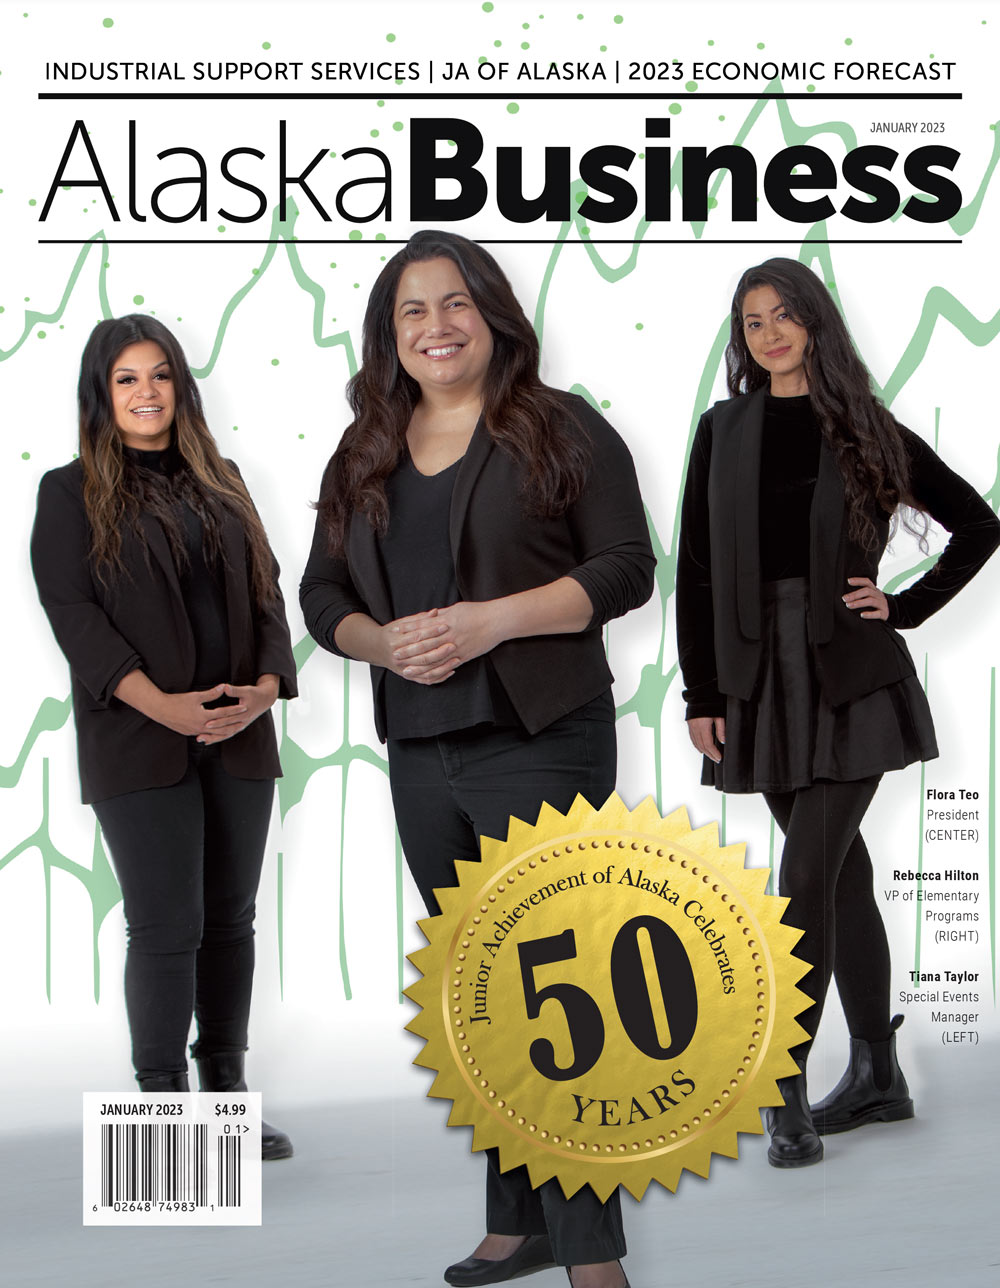 Alaska Business January 2023 issue cover